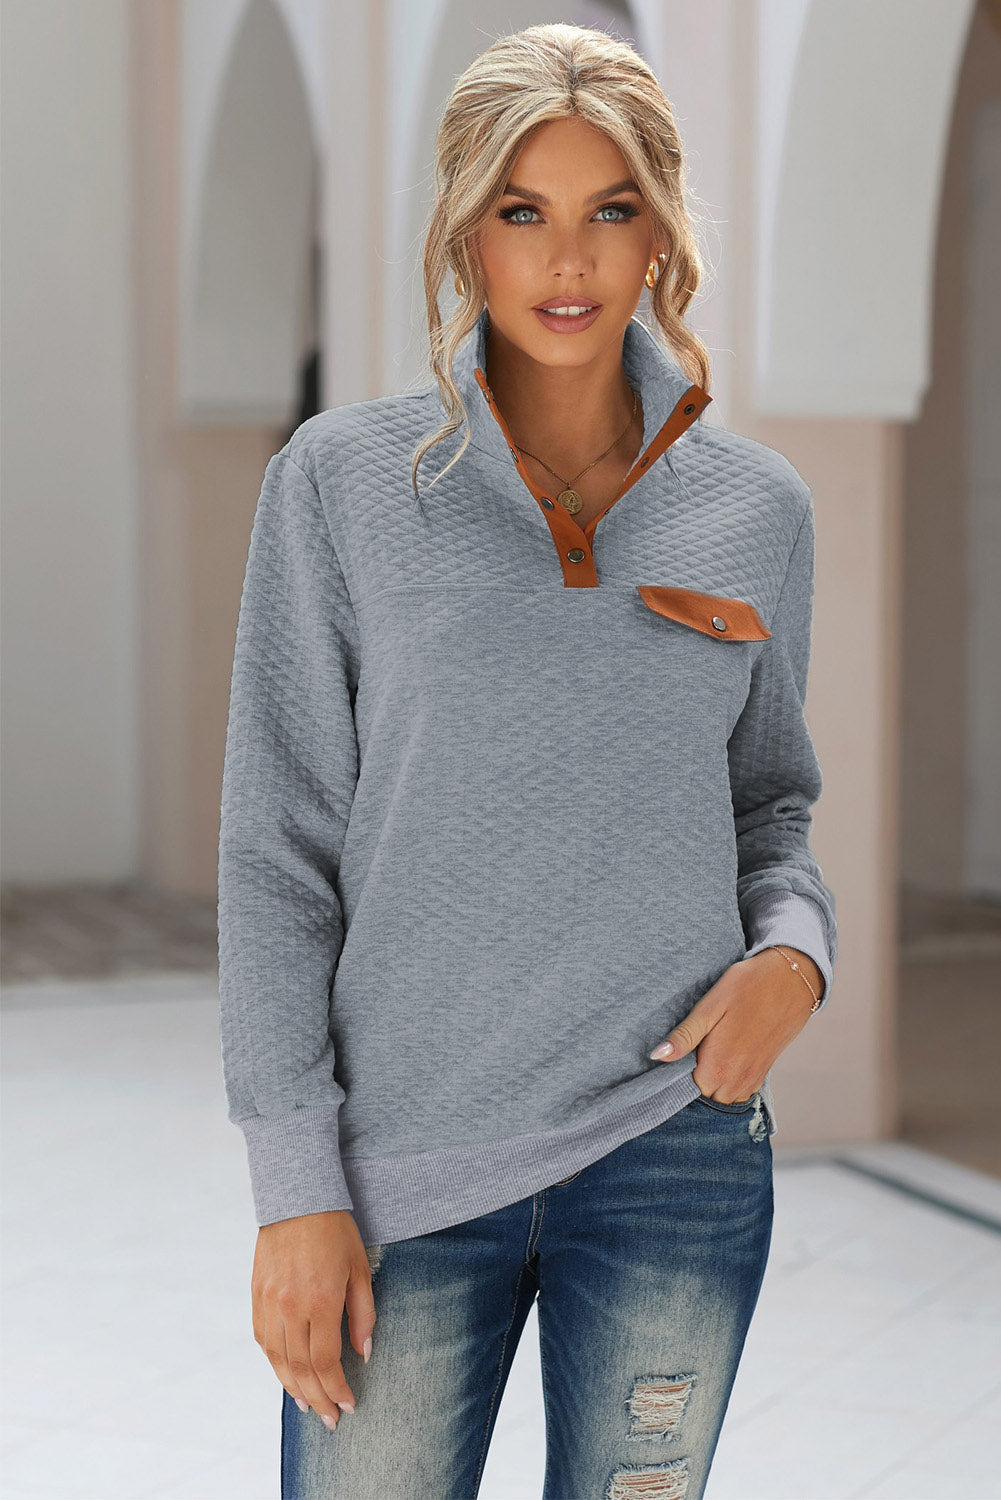 Collared Neck Long Sleeve Top - Gray / S - Women’s Clothing & Accessories - Shirts & Tops - 5 - 2024